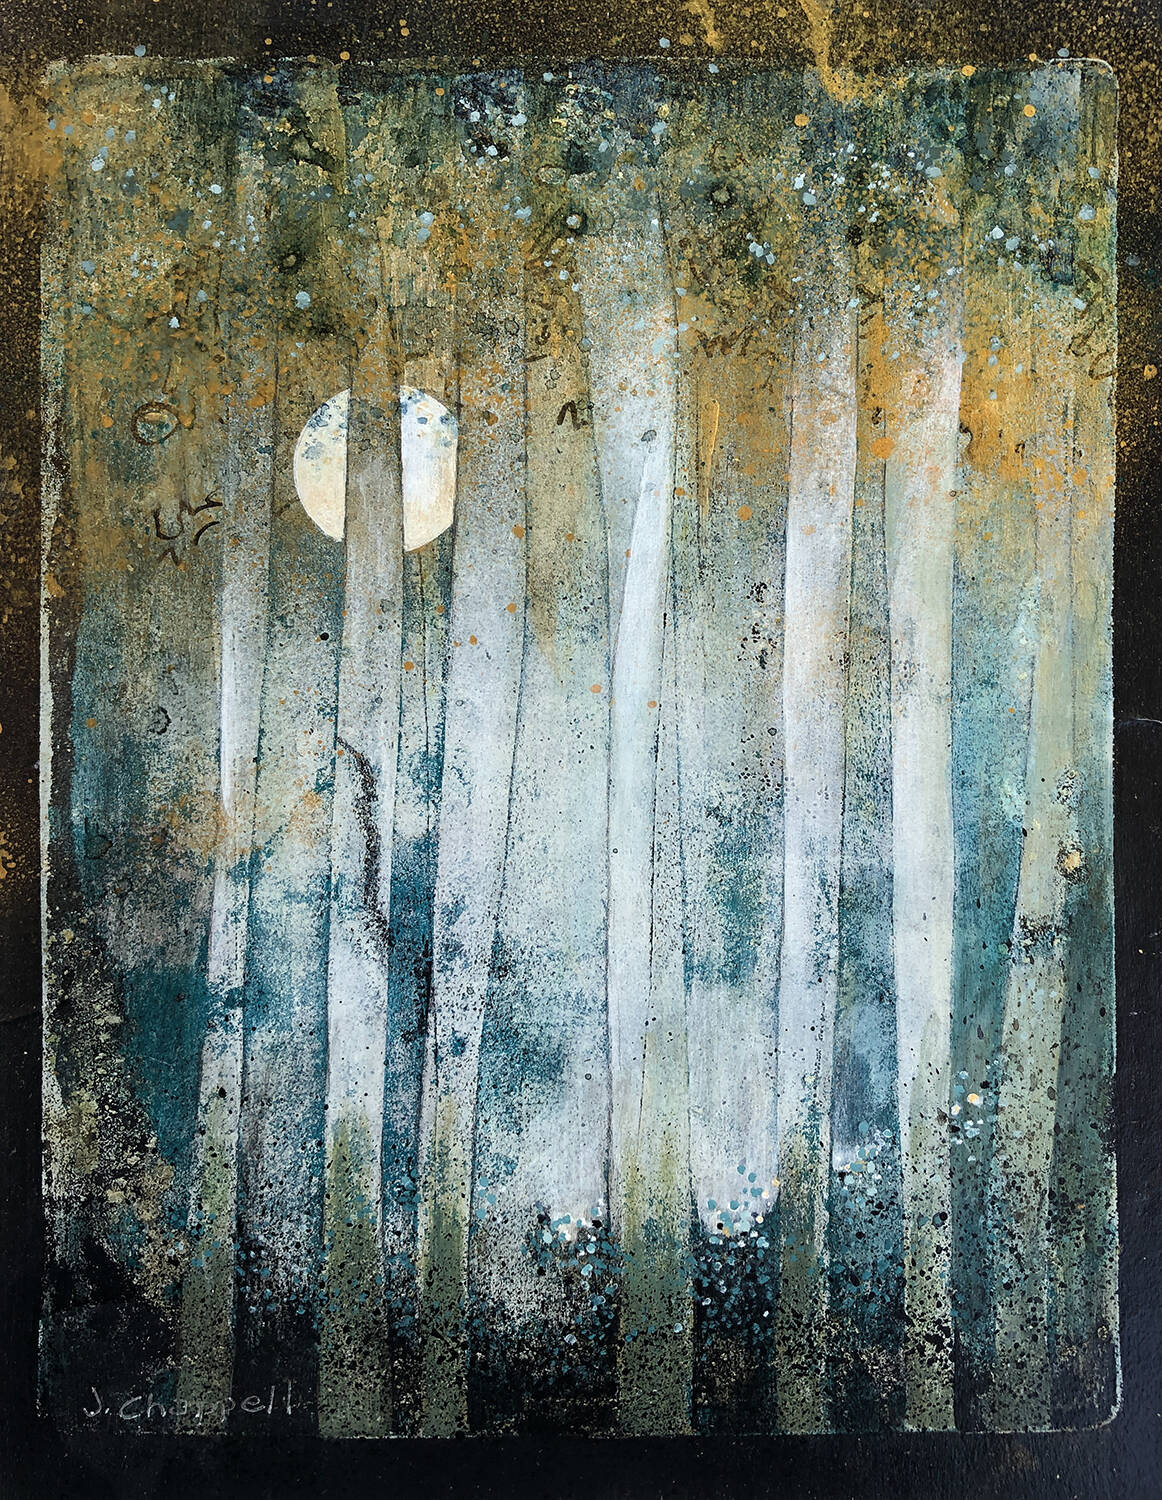 “Rise Like a Moon” by Jeannine Chappell, a featured artist at the Blue Whole Gallery’s “These Artists Do It All!” exhibit in September. (Artwork courtesy of Jeannine Chappell)